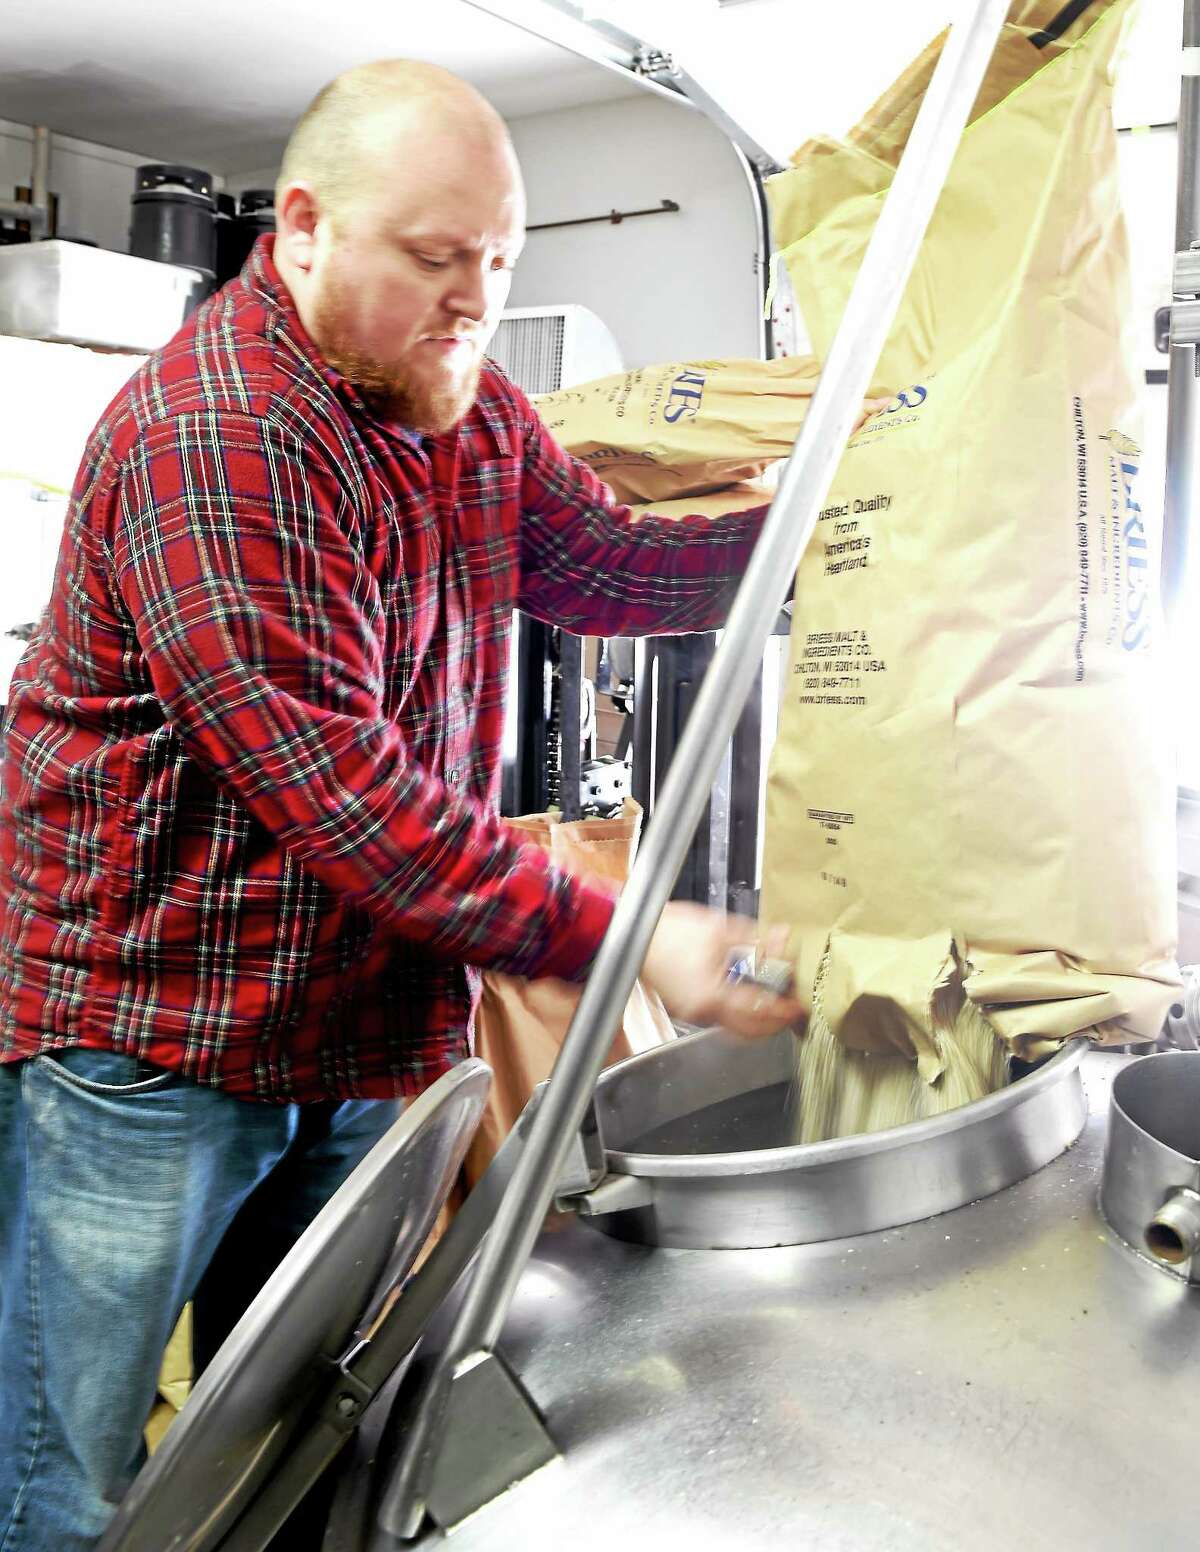 Mike Fawcett, co-founder and Brewmaster at the Thimble Island Brewery in Branford, pours malted barley grain into a Mash Tun filled with hot water during a sugar extraction process that helps make beer. Wednesday, February 11, 2015.